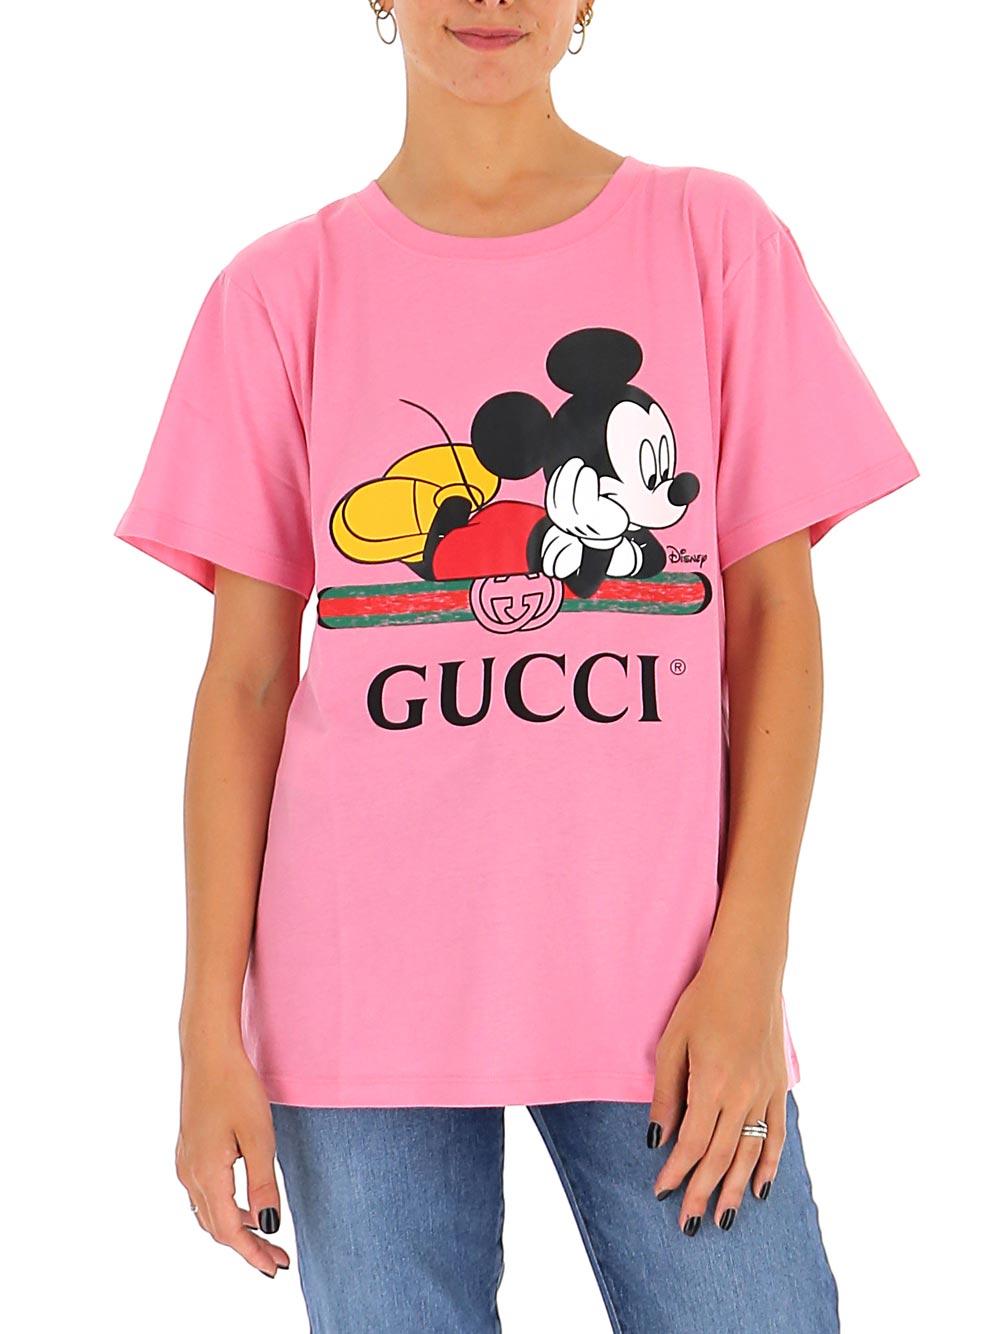 Gucci Cotton X Disney Oversized Tshirt in Pink Lyst